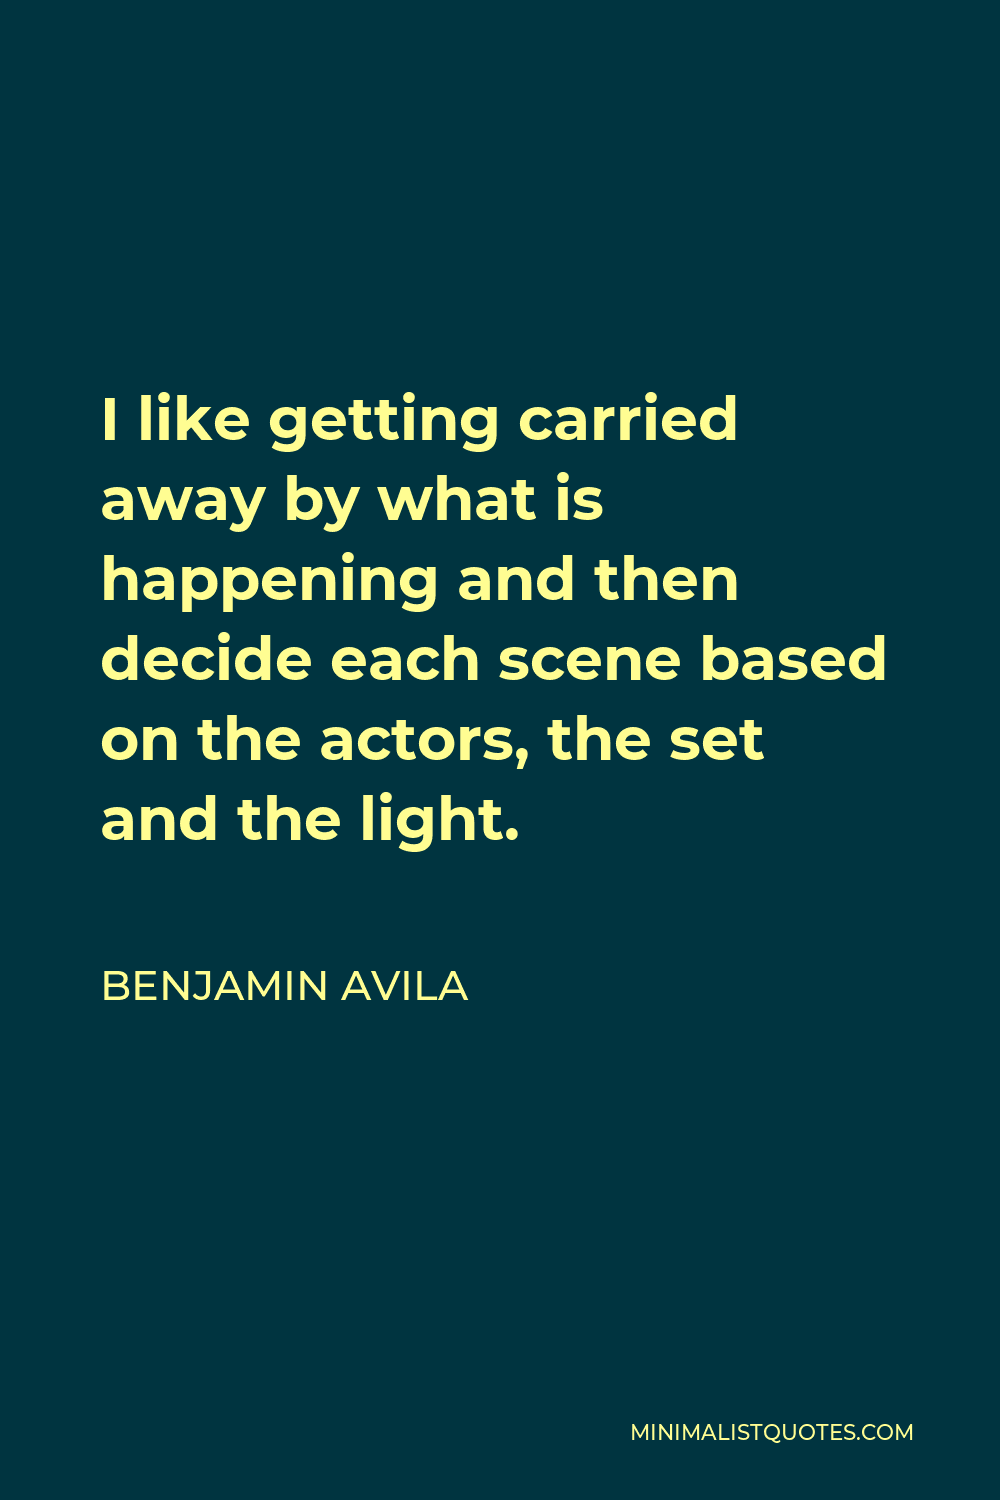 Benjamin Avila Quote - I like getting carried away by what is happening and then decide each scene based on the actors, the set and the light.